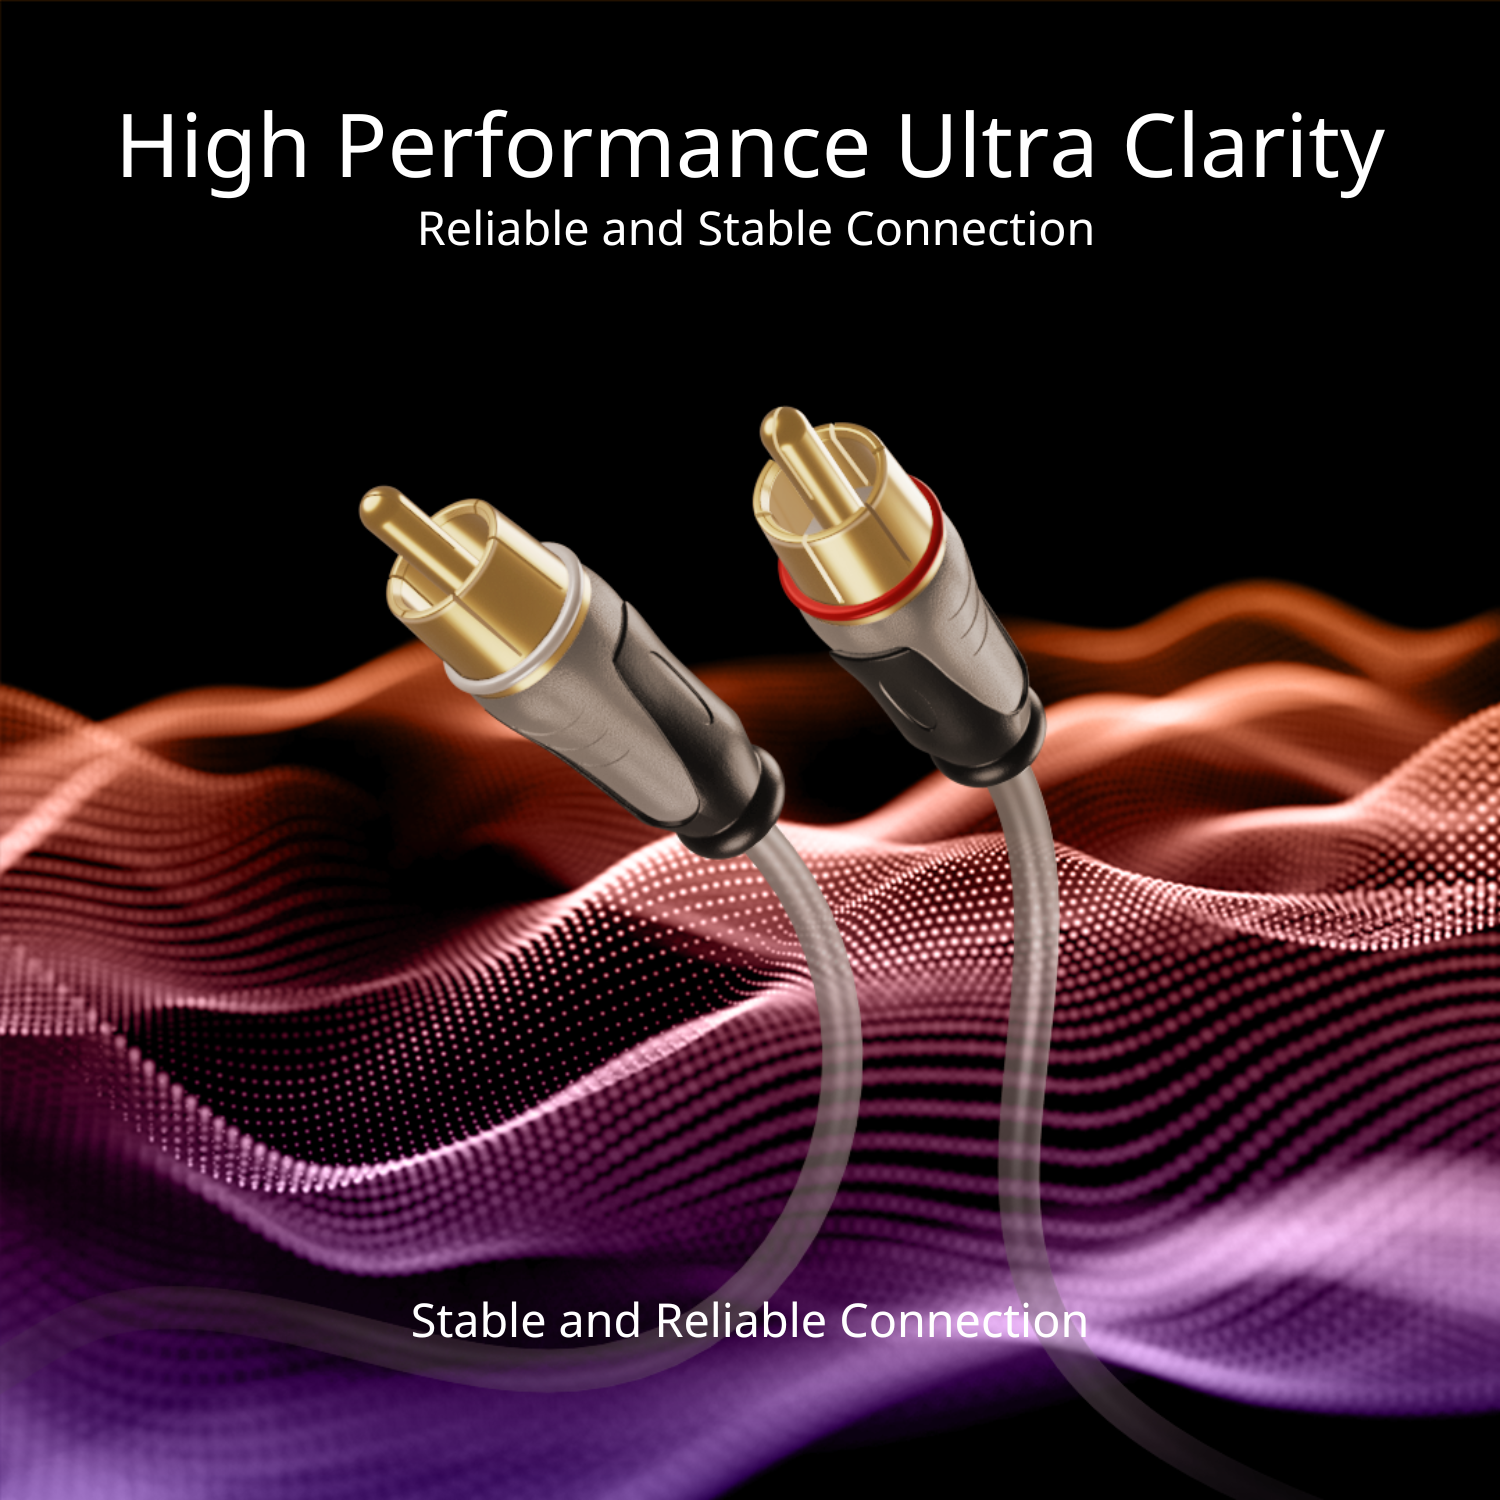 RCA Cable - 2RCA Male to 2RCA Male with Dual Shielded RCA Audio Cable - 2 Channel RCA Male to Male Stereo Connector, Gold Plated RCA Cables 50ft for Amplifiers, Car Audio, Home Theater, Speakers - image 4 of 6